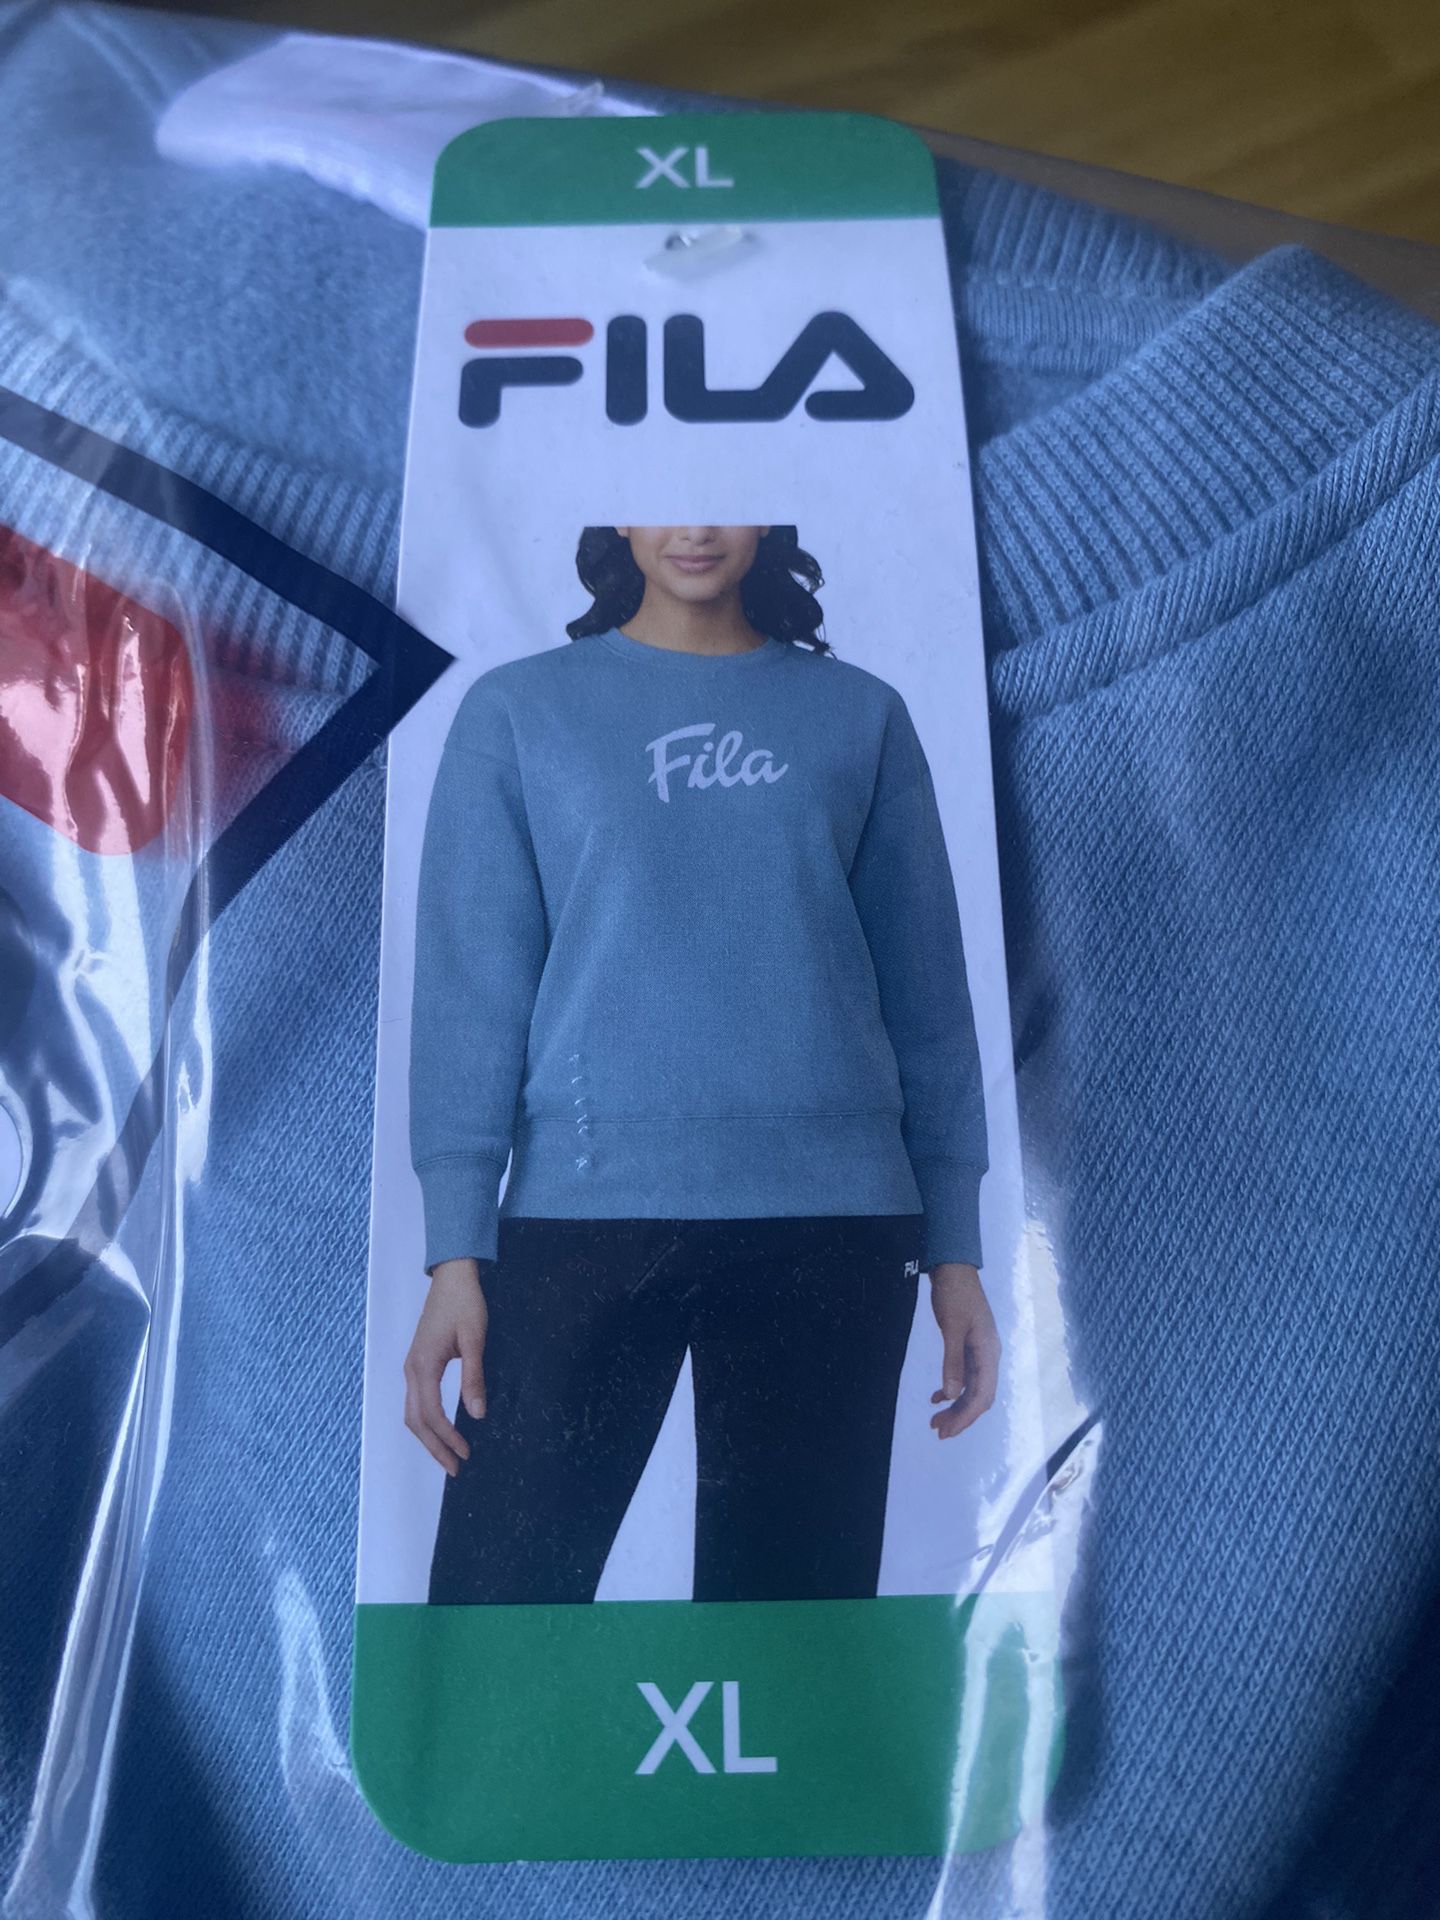 Bliv såret mønt Adept Fila Sweater XL Large Medium And Small for Sale in Paramount, CA - OfferUp